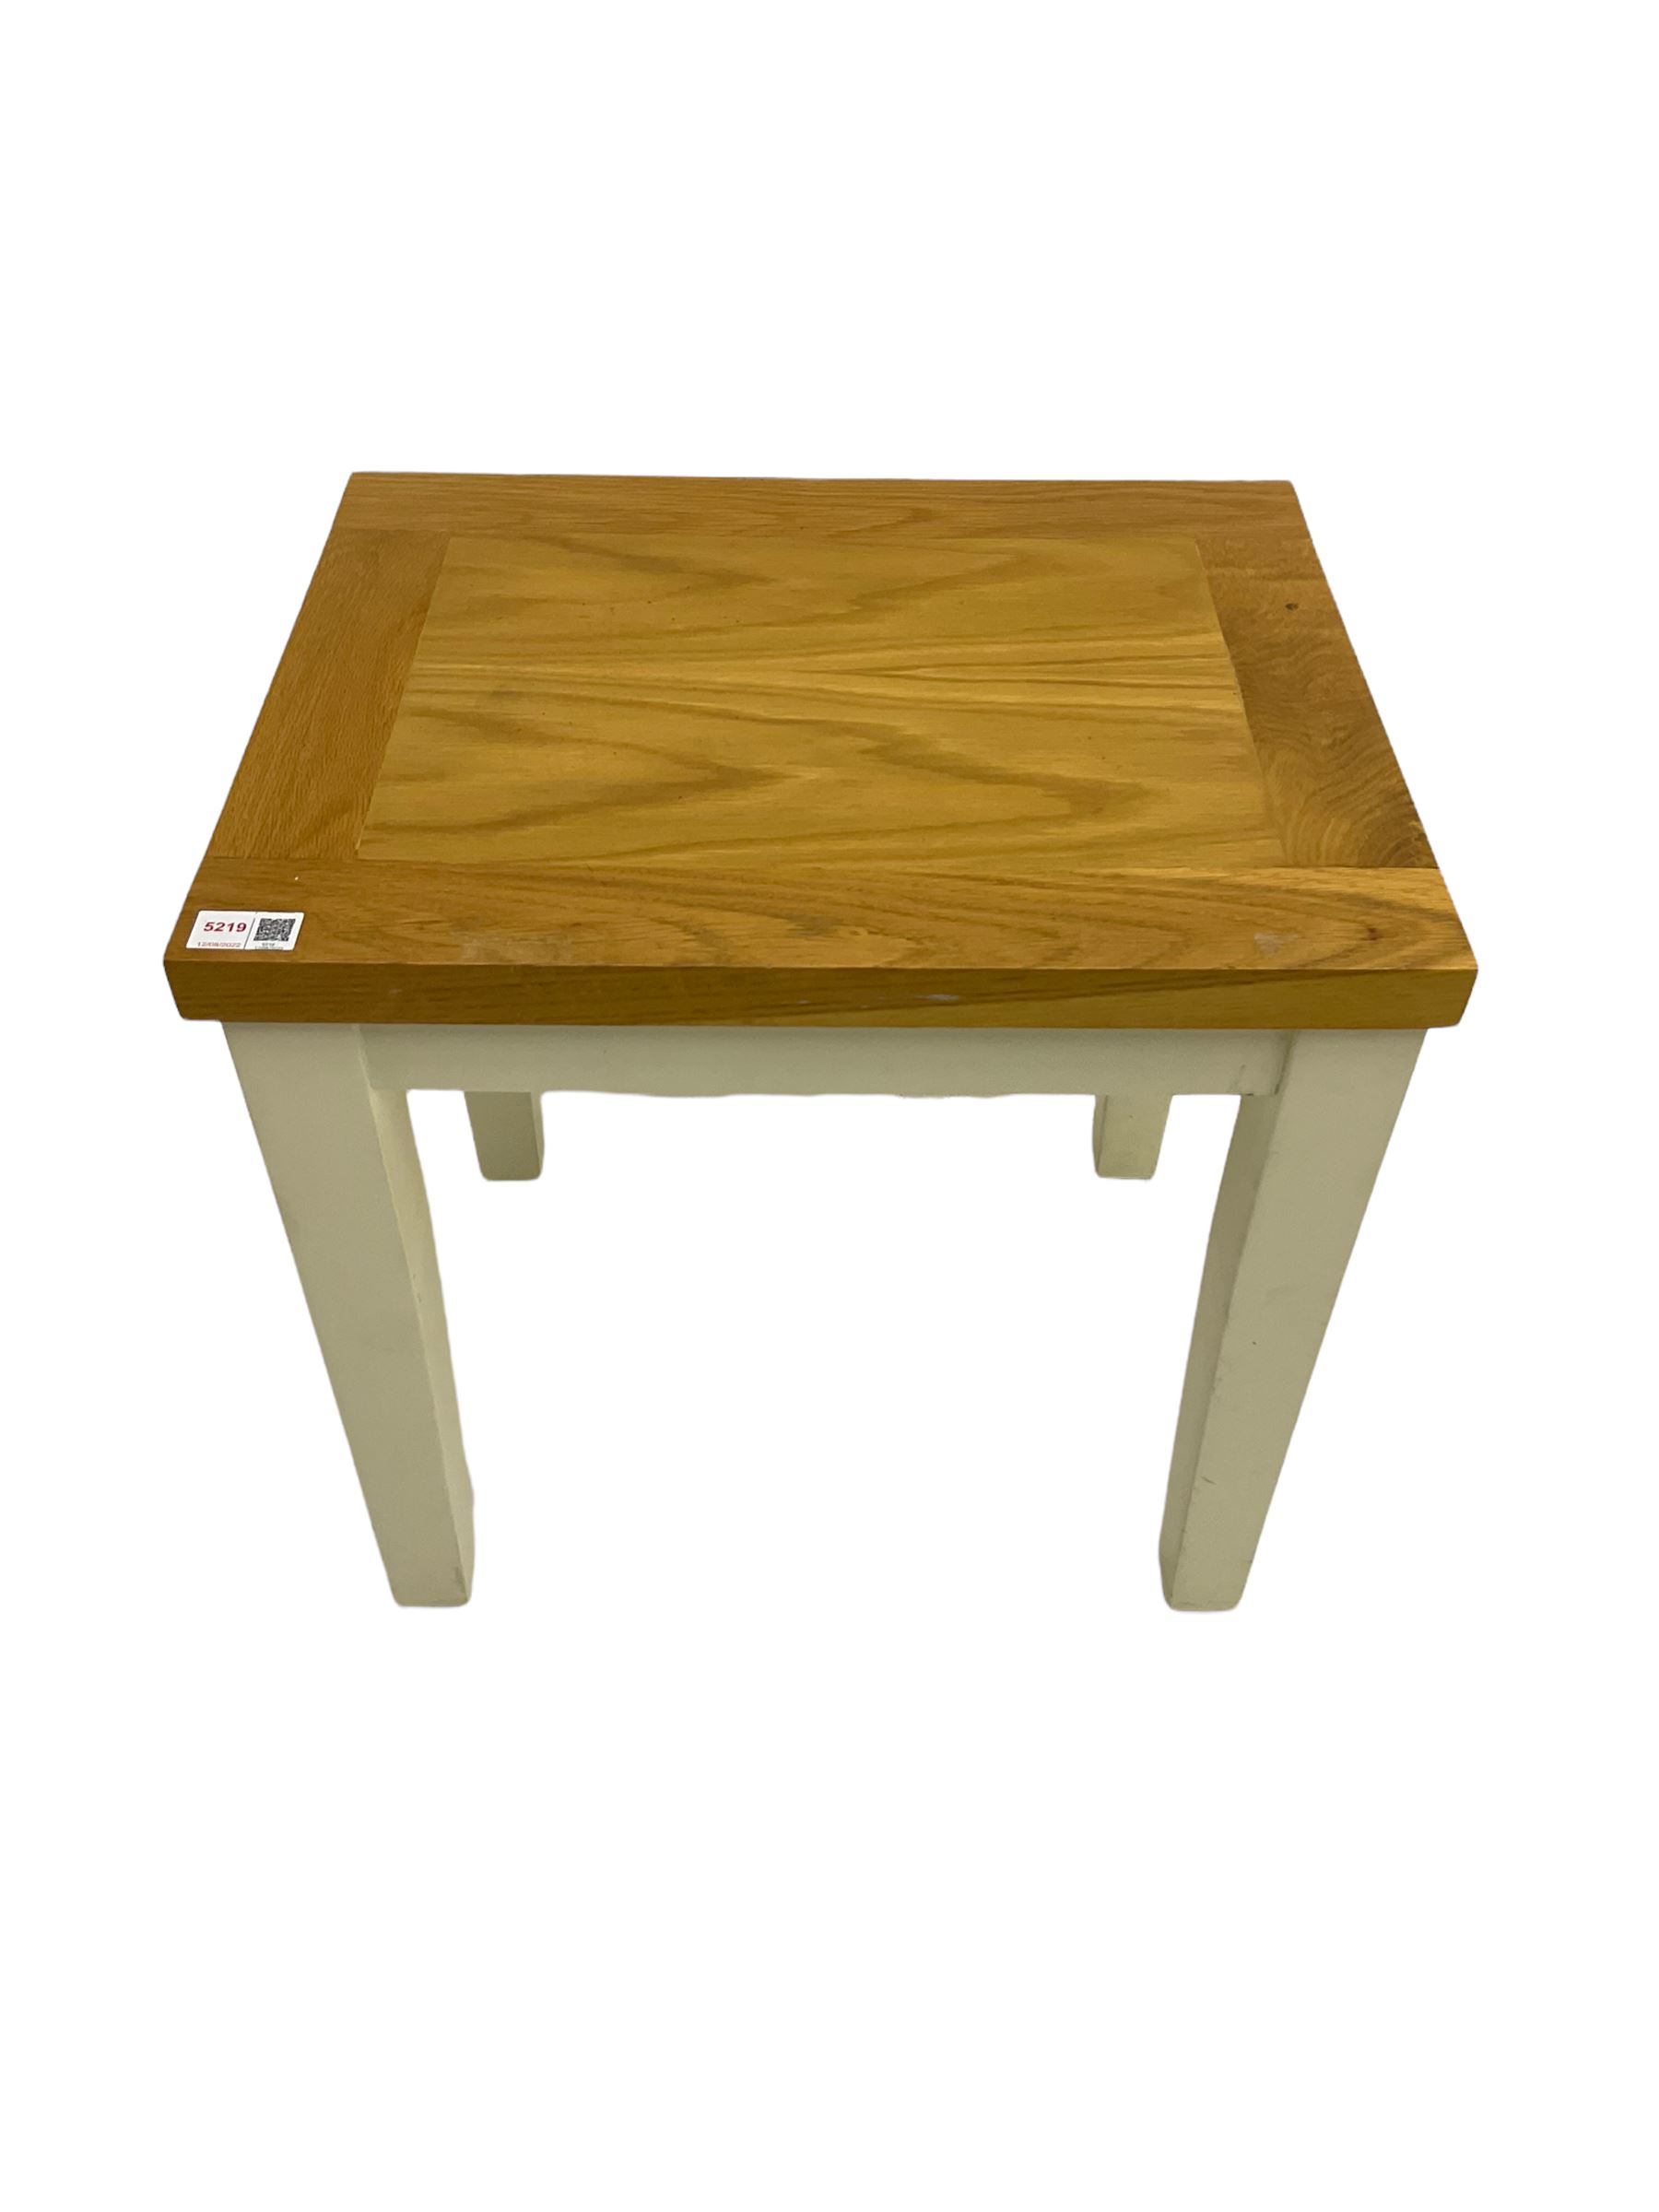 Rectangular oak top occasional table on painted base - Image 4 of 4